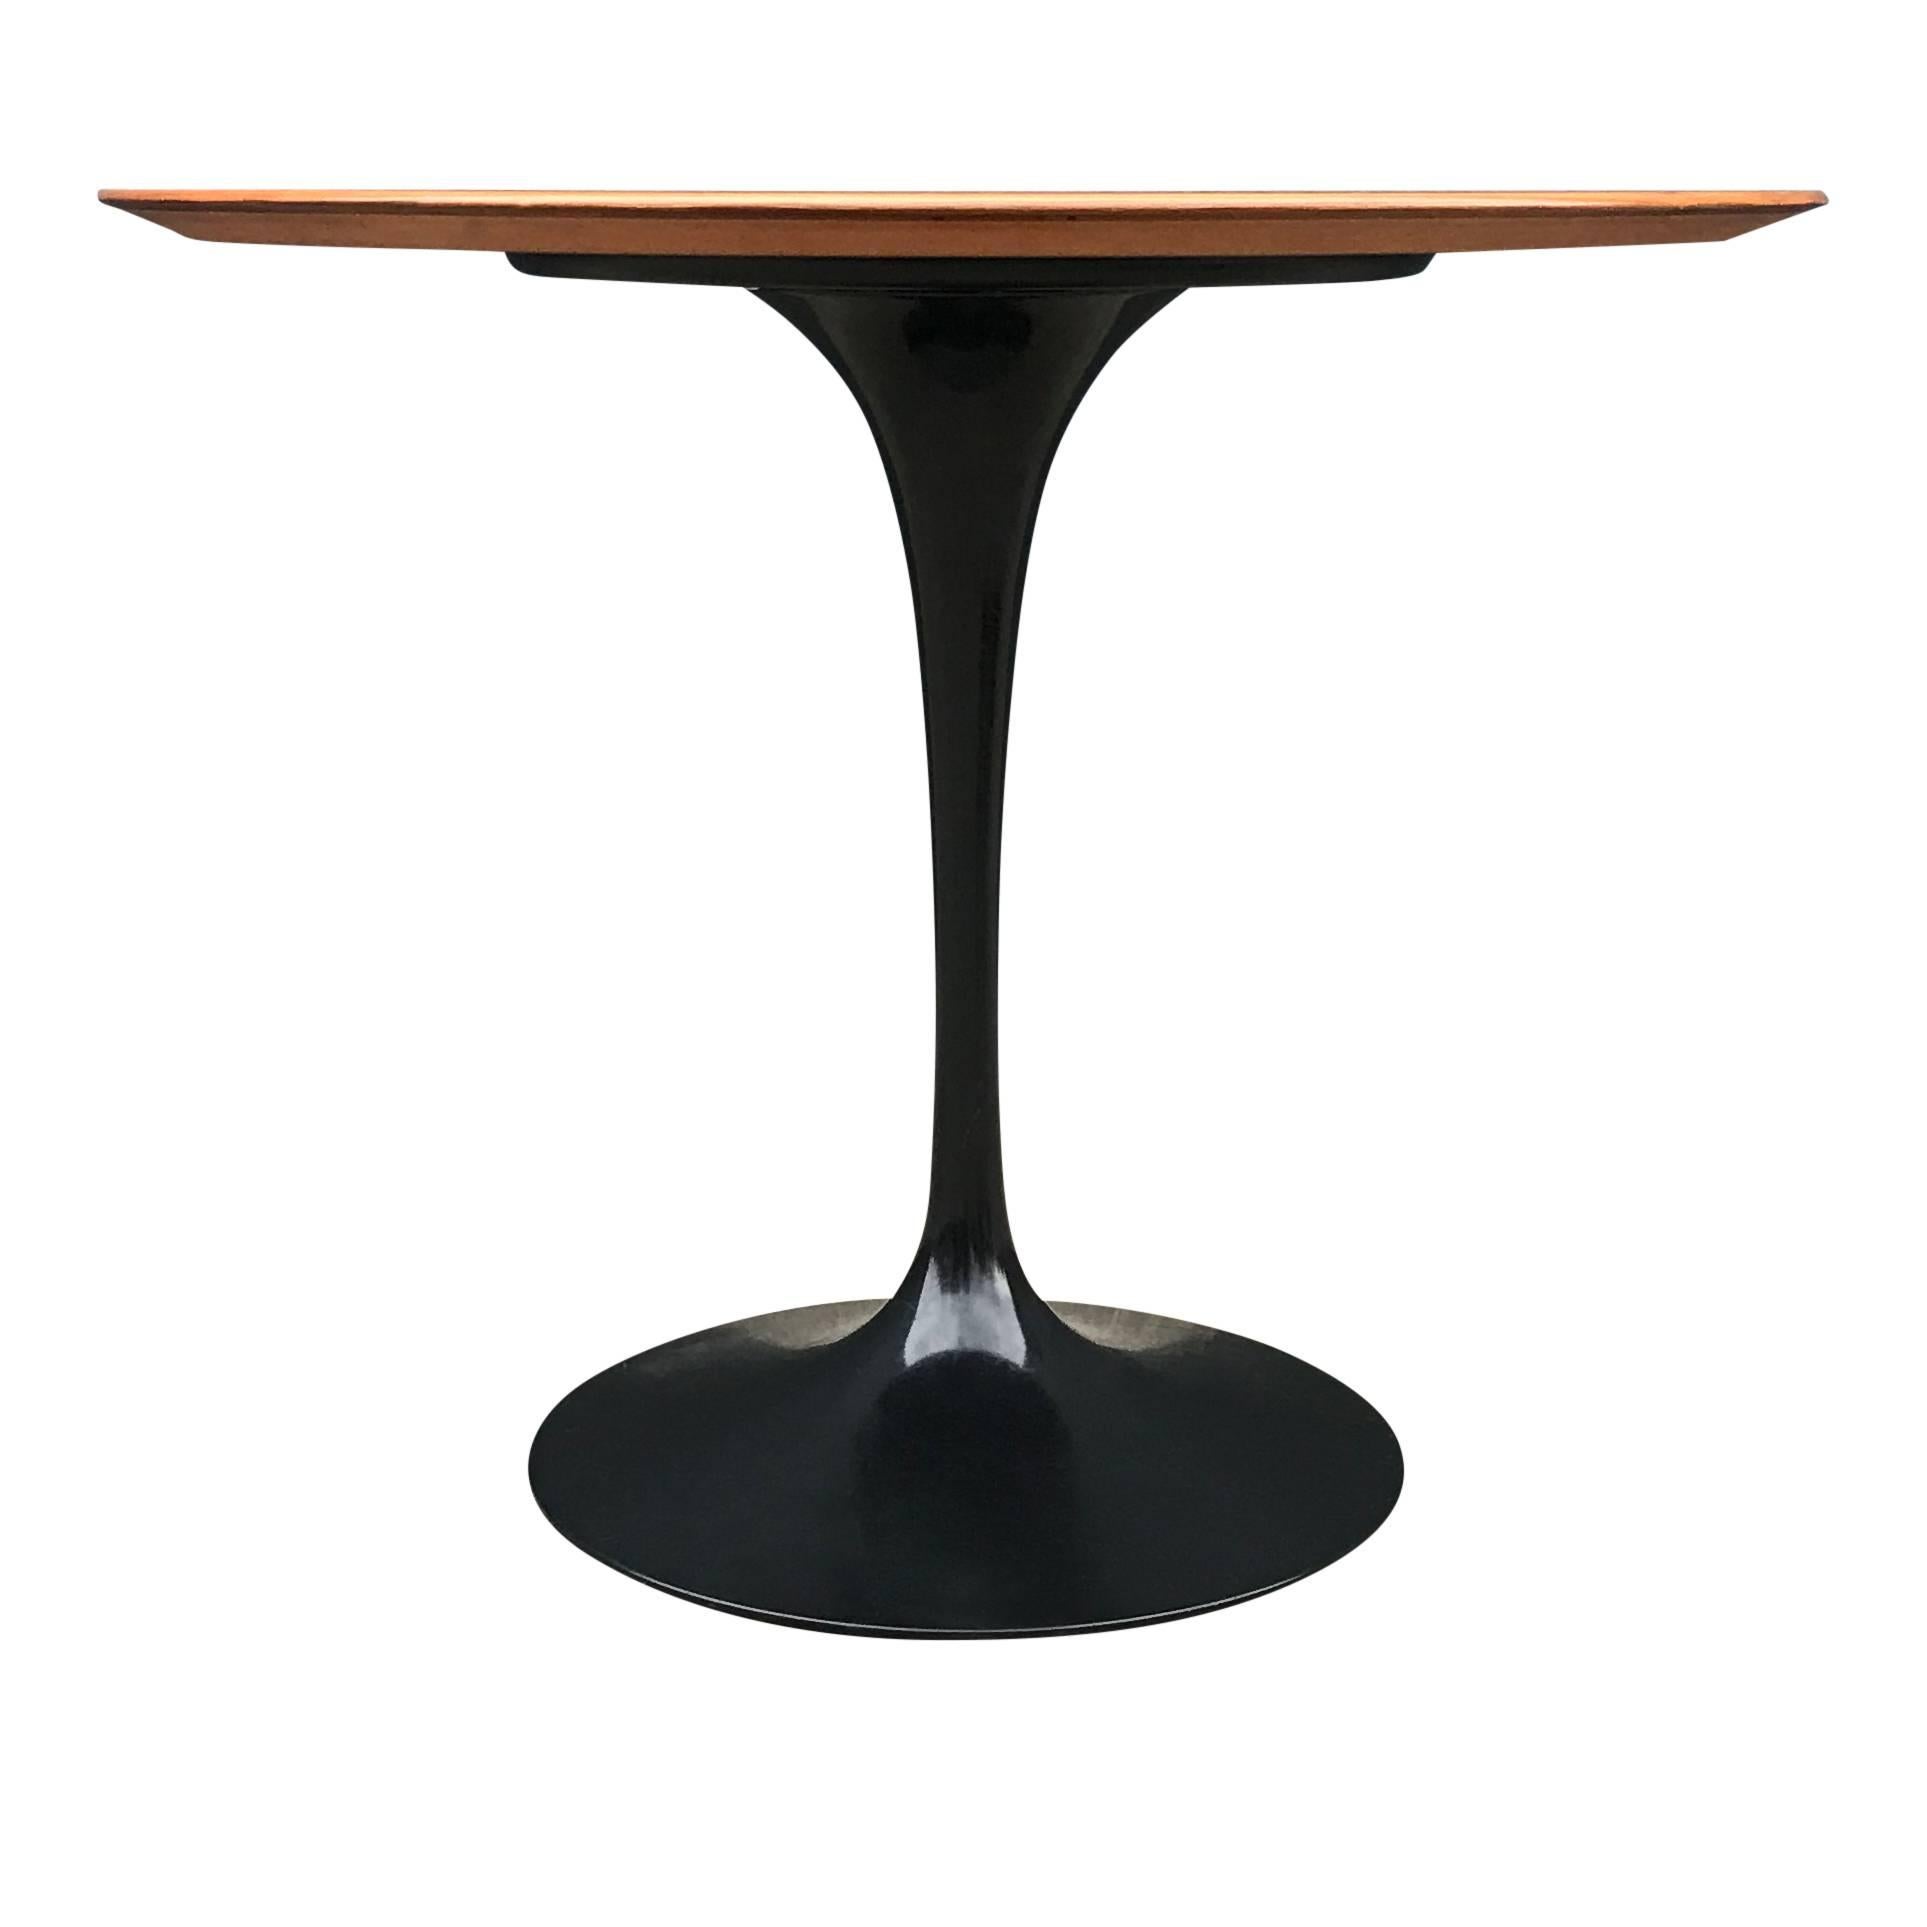 For sale is an iconic midcentury table, the 